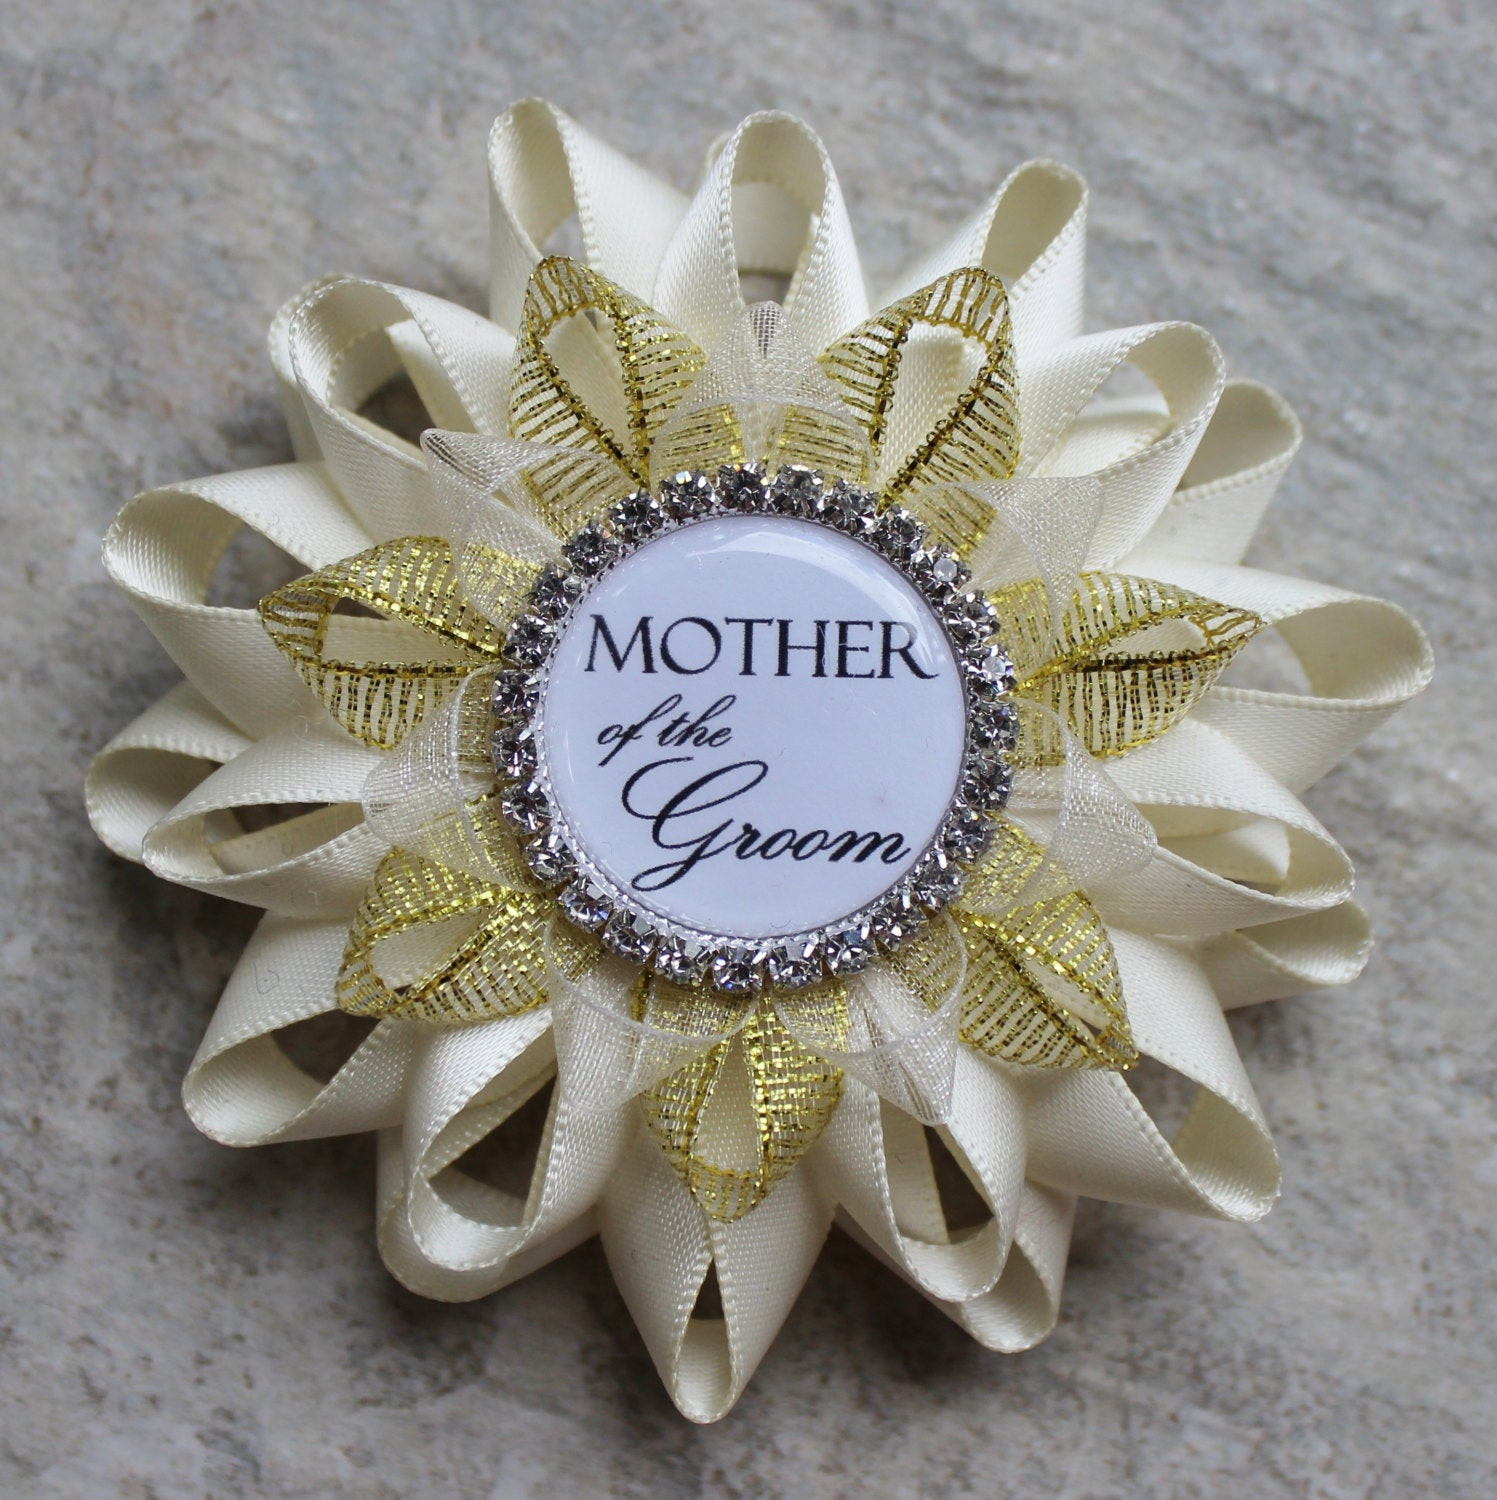 Bridal Shower Gift Ideas From Mother Of The Bride
 Bridal Shower Gift Mother of the Groom Gift Mother of the